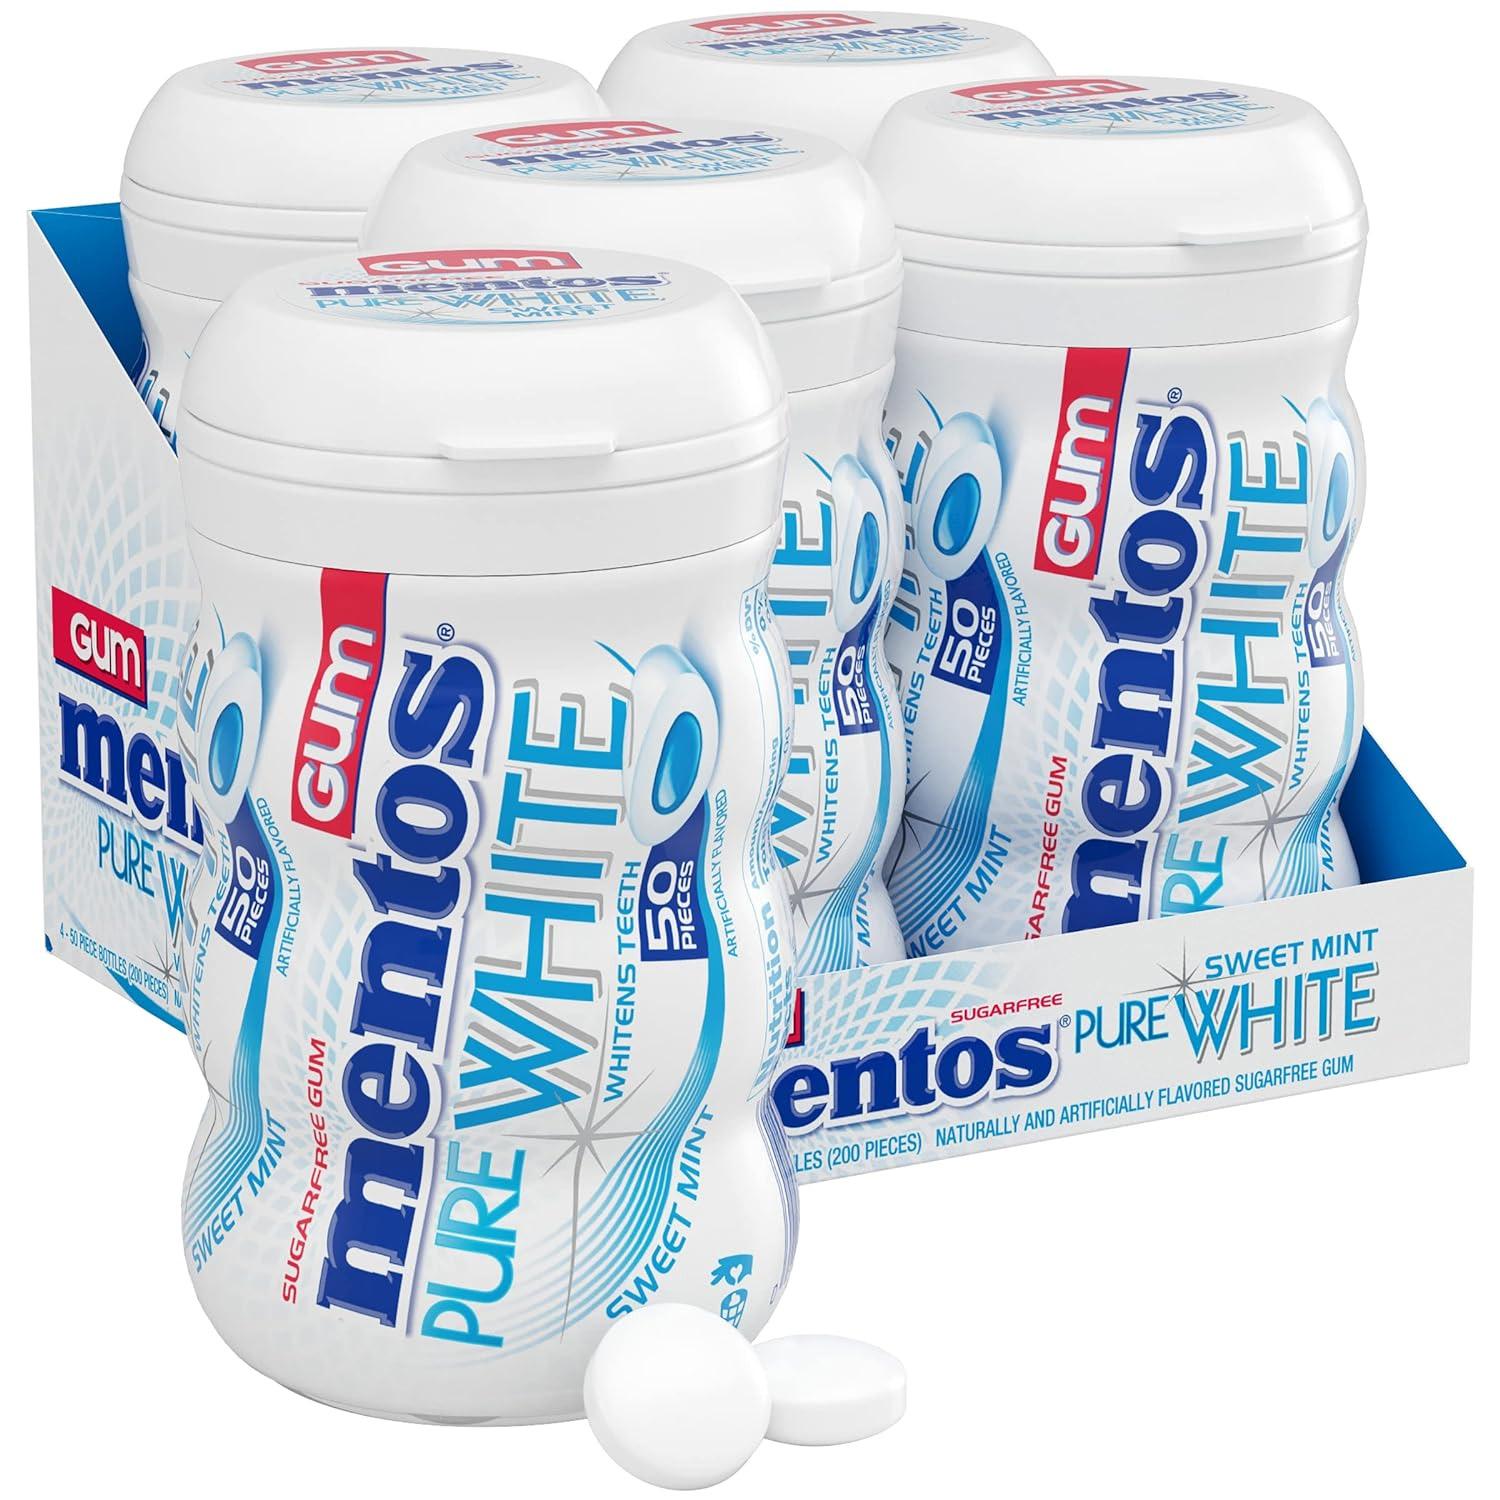 Mentos Pure White Chewing Gum with Xylitol 4 Pack for $10.30